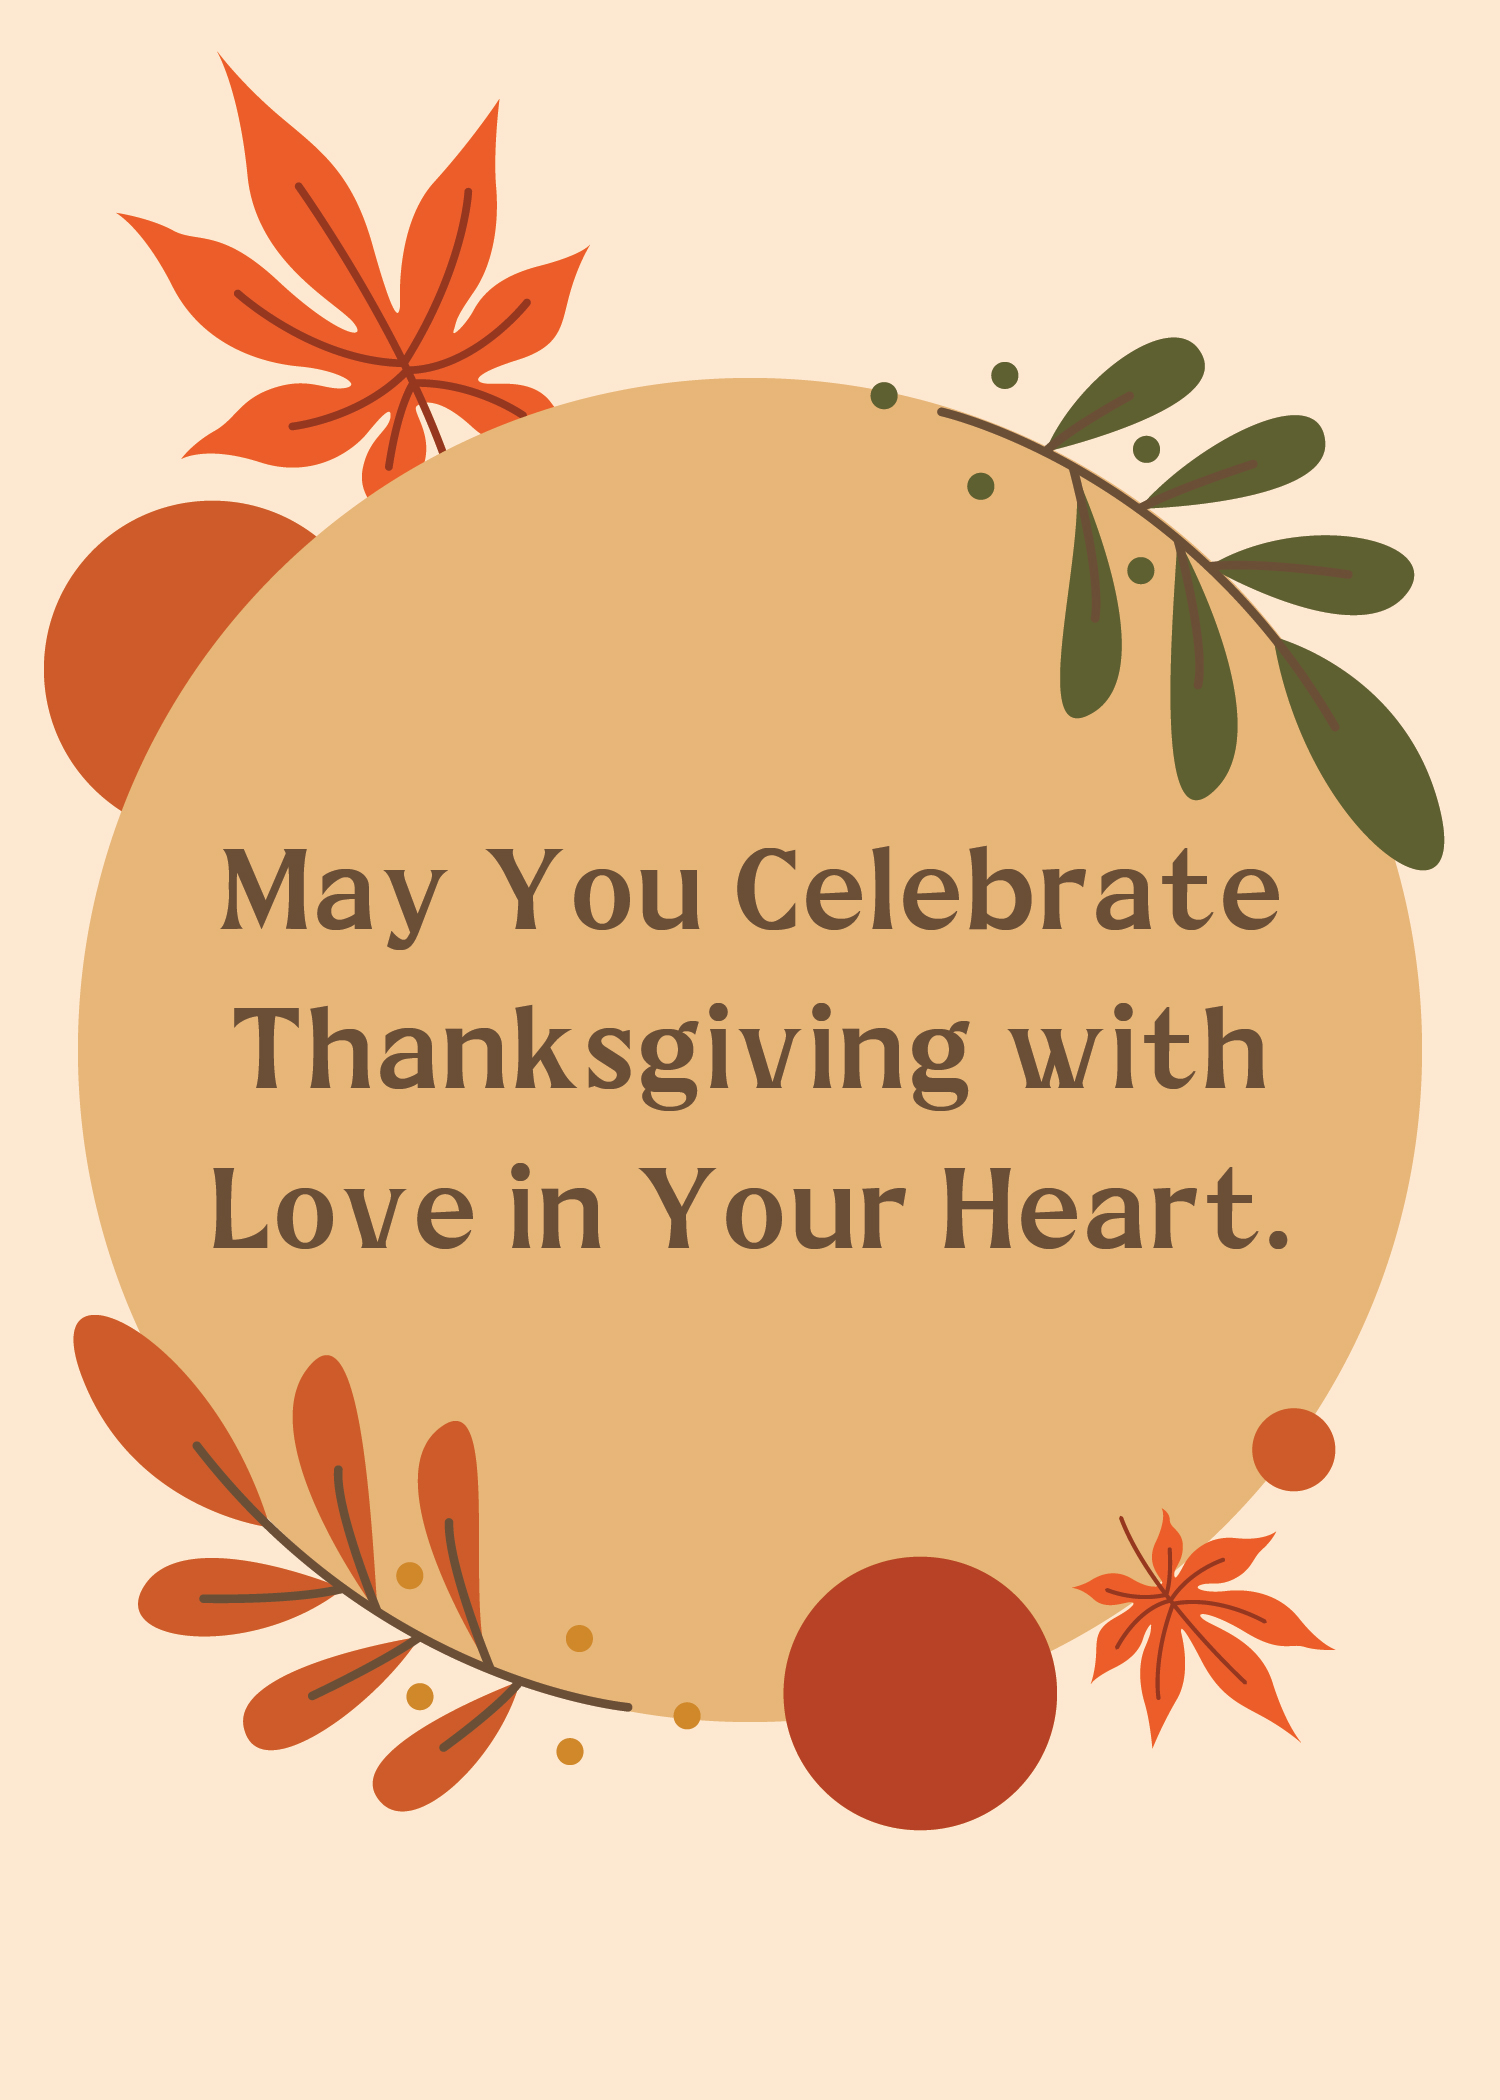 Free Thanksgiving Day Message in Word, Google Docs, Illustrator, PSD, Apple Pages, Publisher, EPS, SVG, JPG, PNG